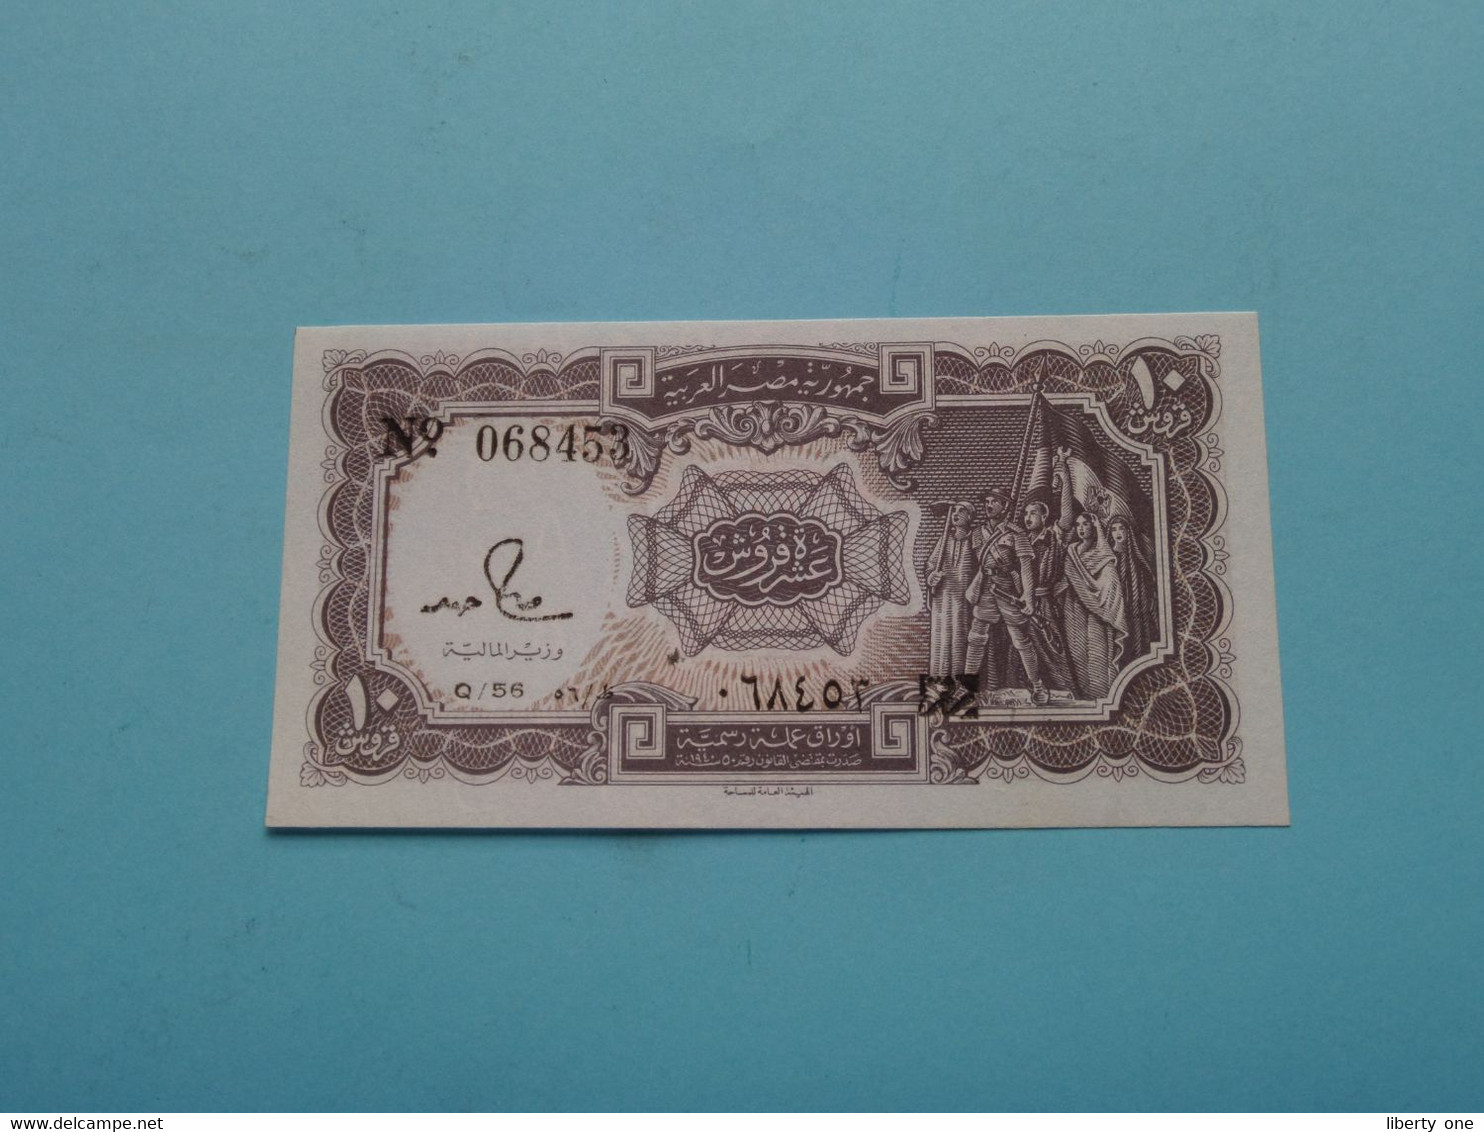 10 Piastres ( N° 068453 ) The Arab Republic Of EGYPT - Q 56 ( Voir / See > Scans ) UNC ! - Egypte